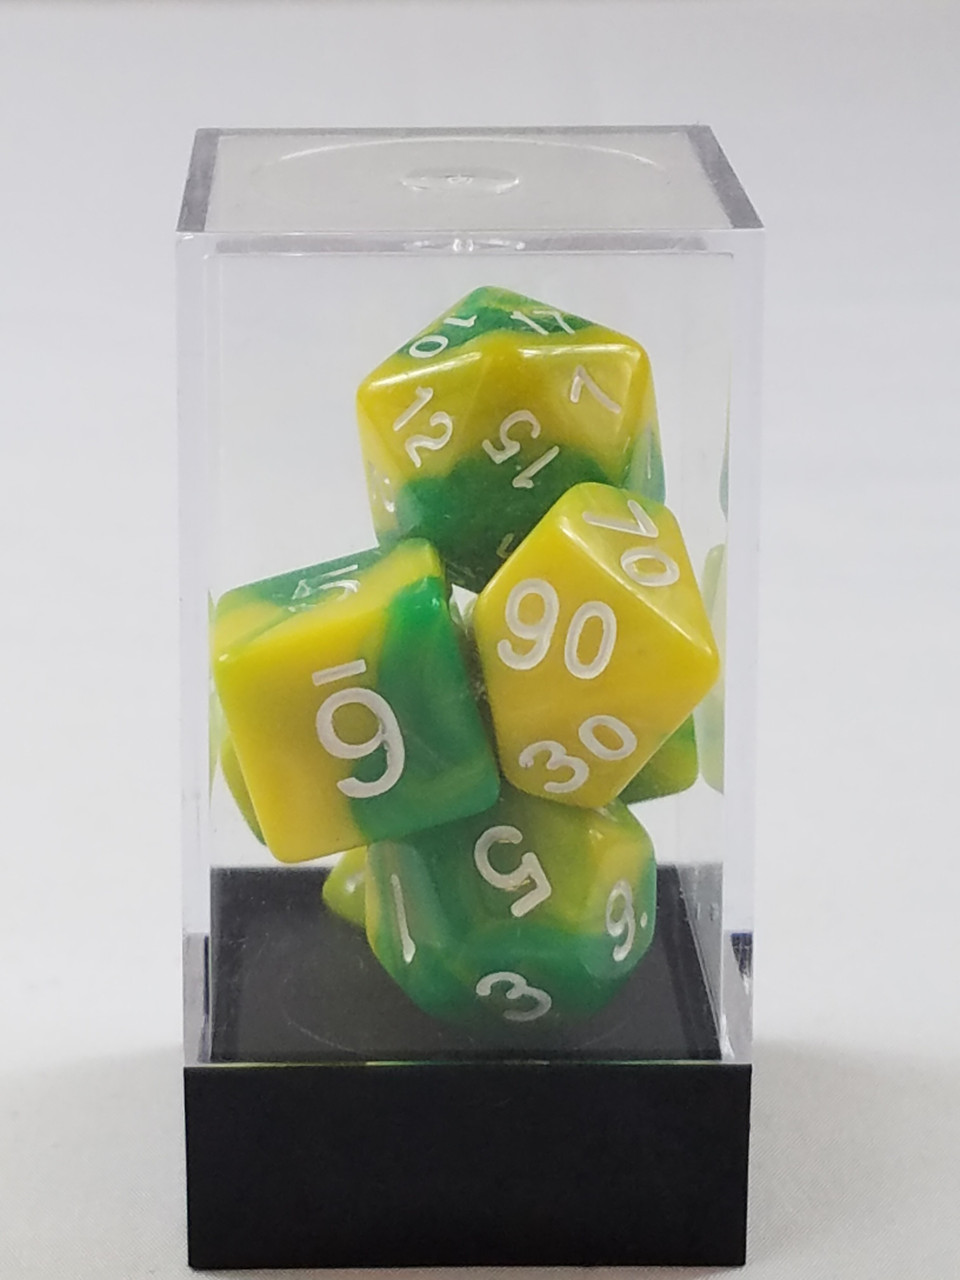 RPG Dice Green Yellow with White Pips Polyhedral 7 Dice Set New